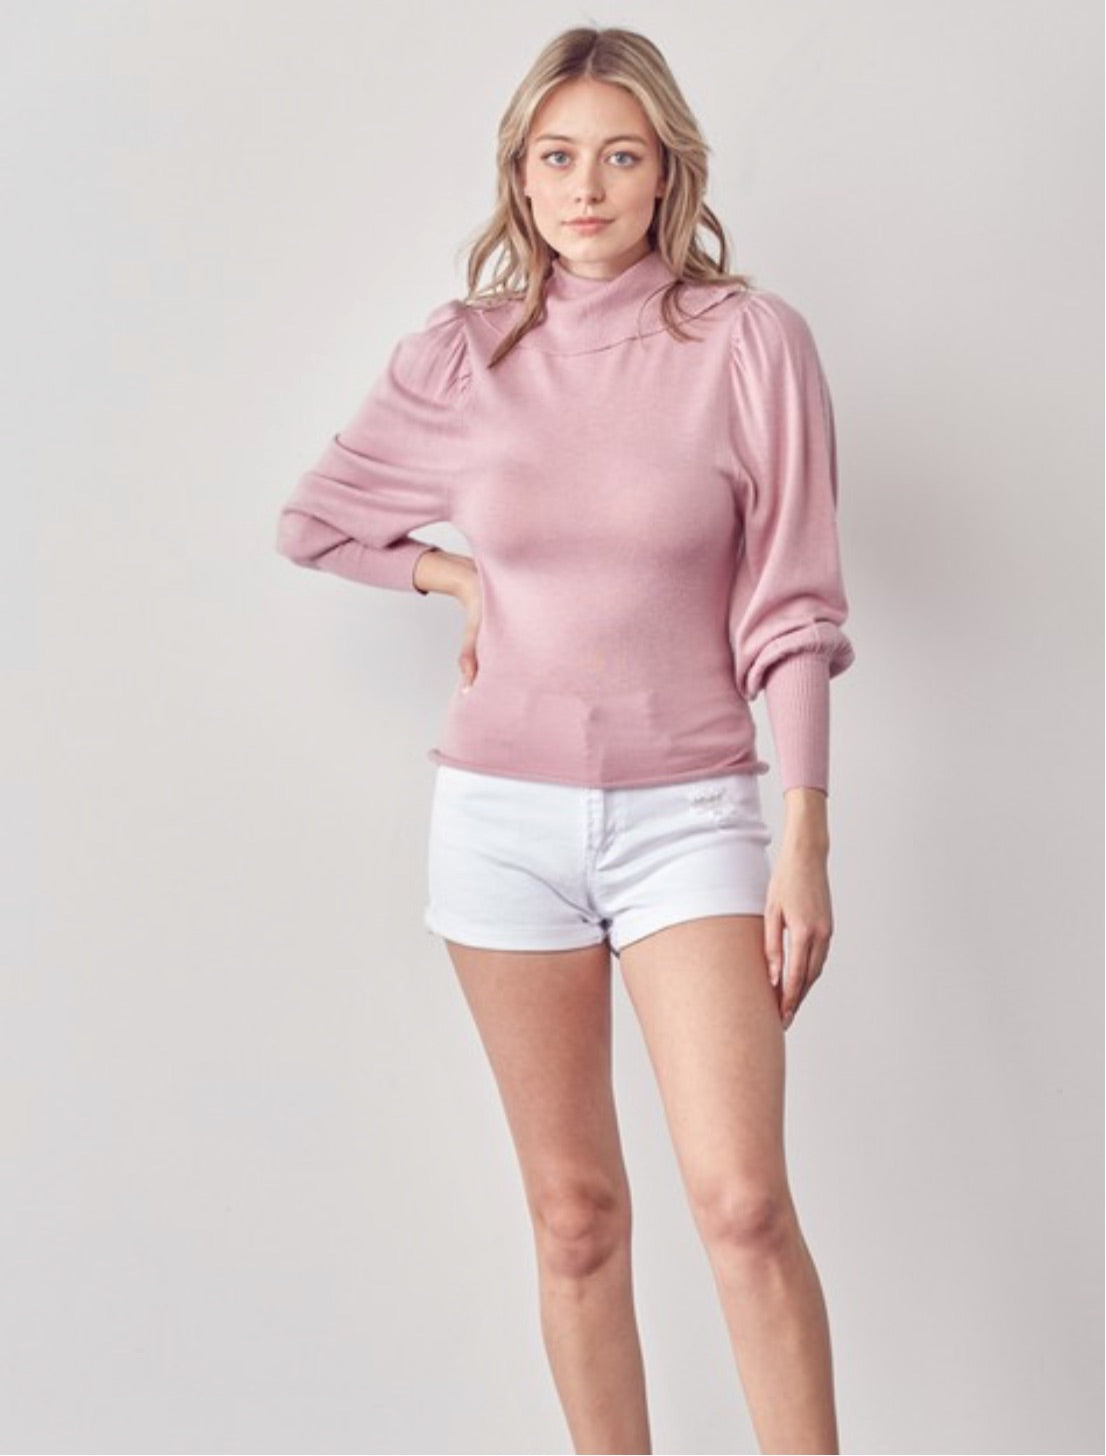 Cashmere Blend Spring Sweater